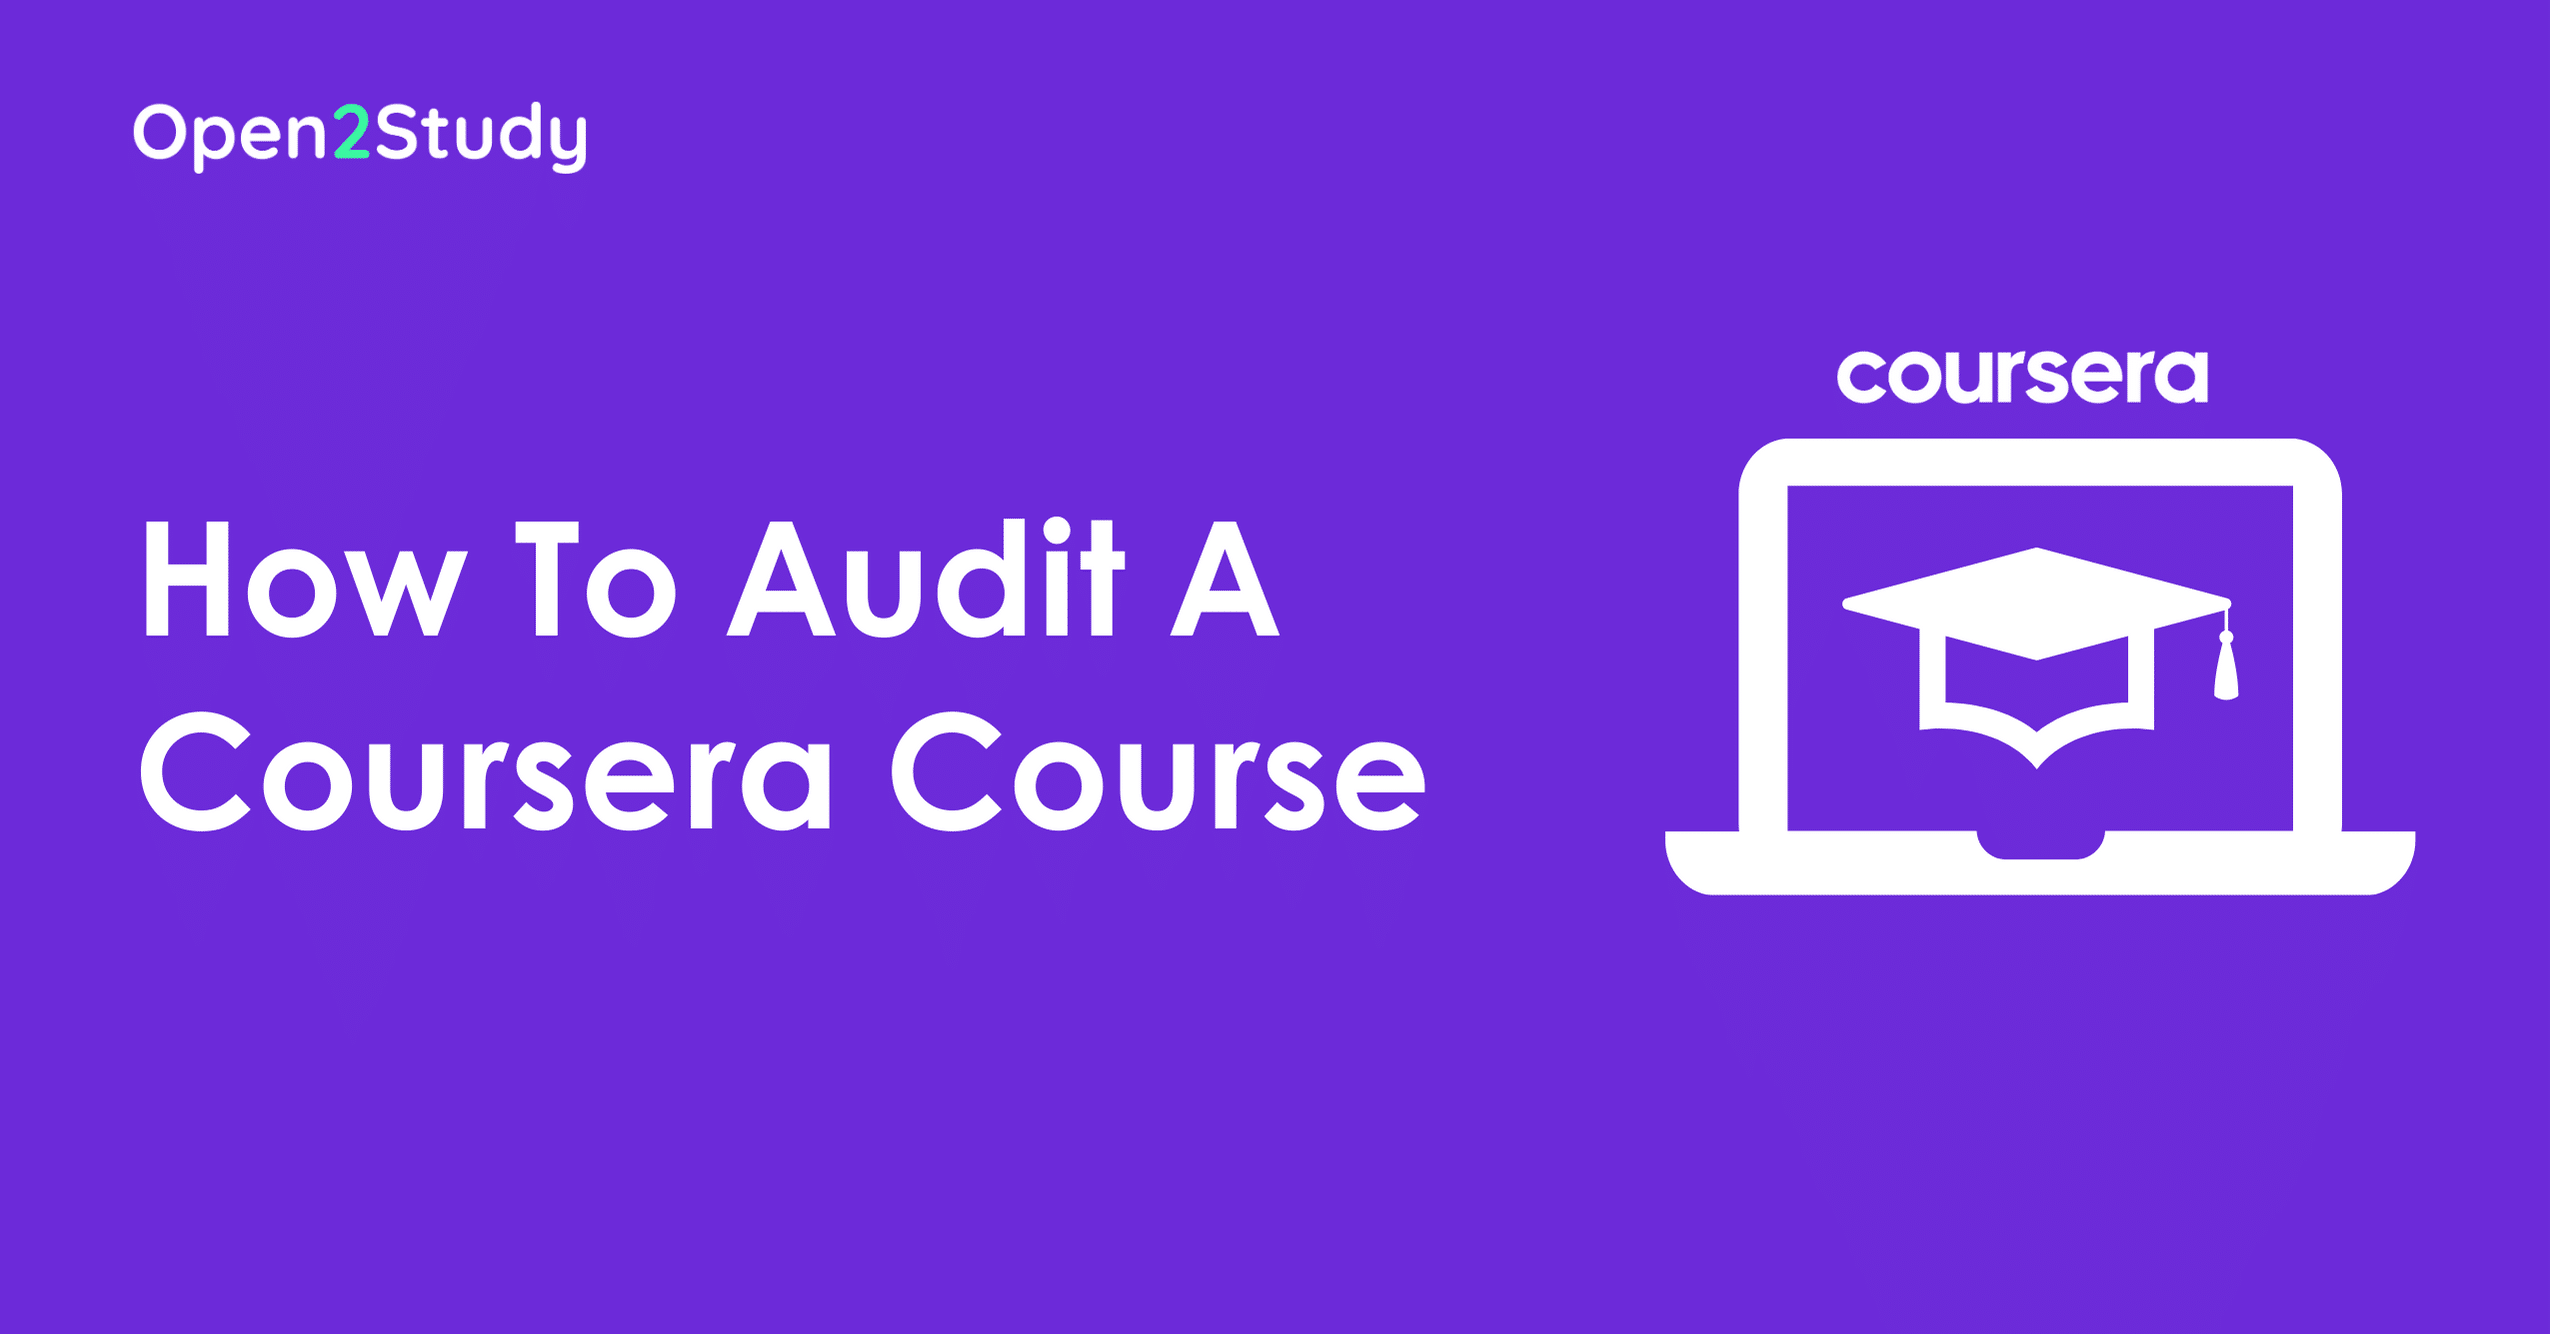 How To Audit A Coursera Course